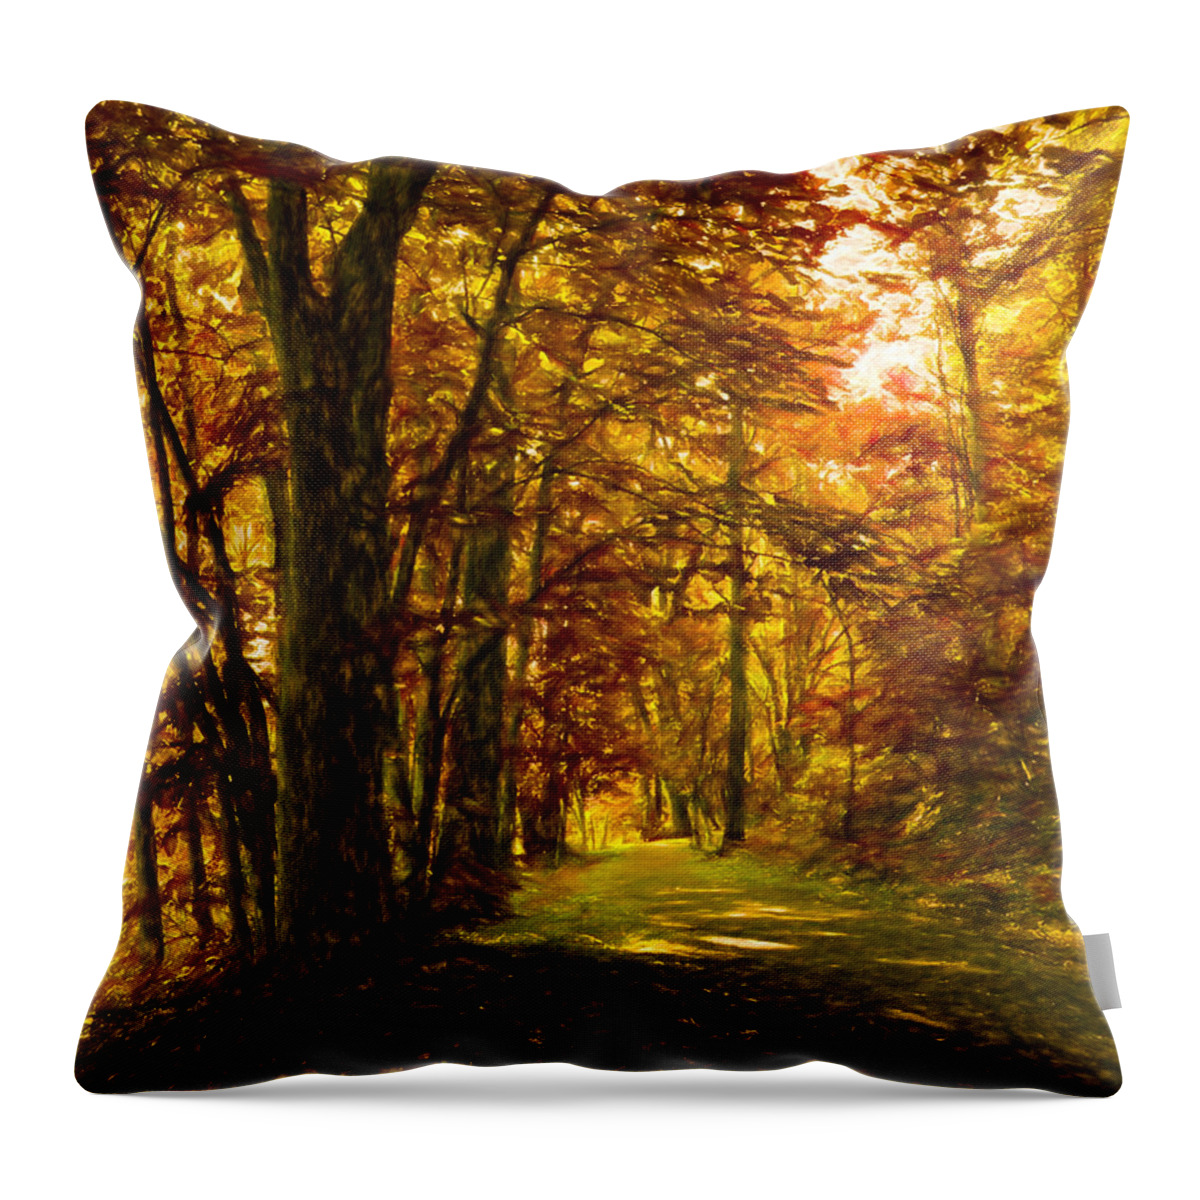 Autumn Throw Pillow featuring the photograph Autumn Glory by Denise Beverly